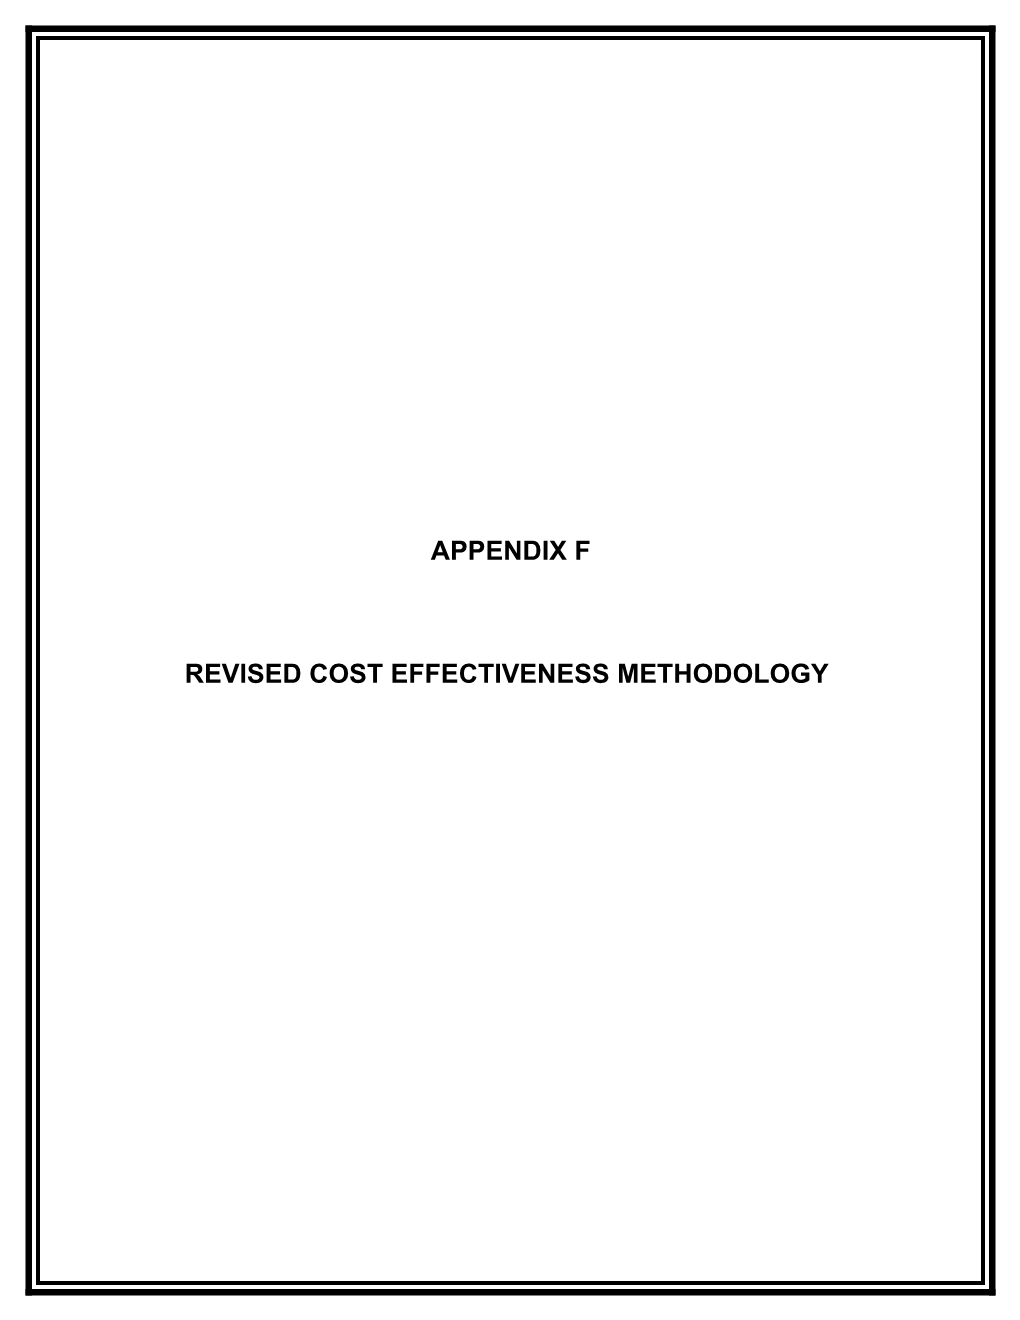 Staff Used the Following Methodology to Derive the Cost Effectiveness Associated with This